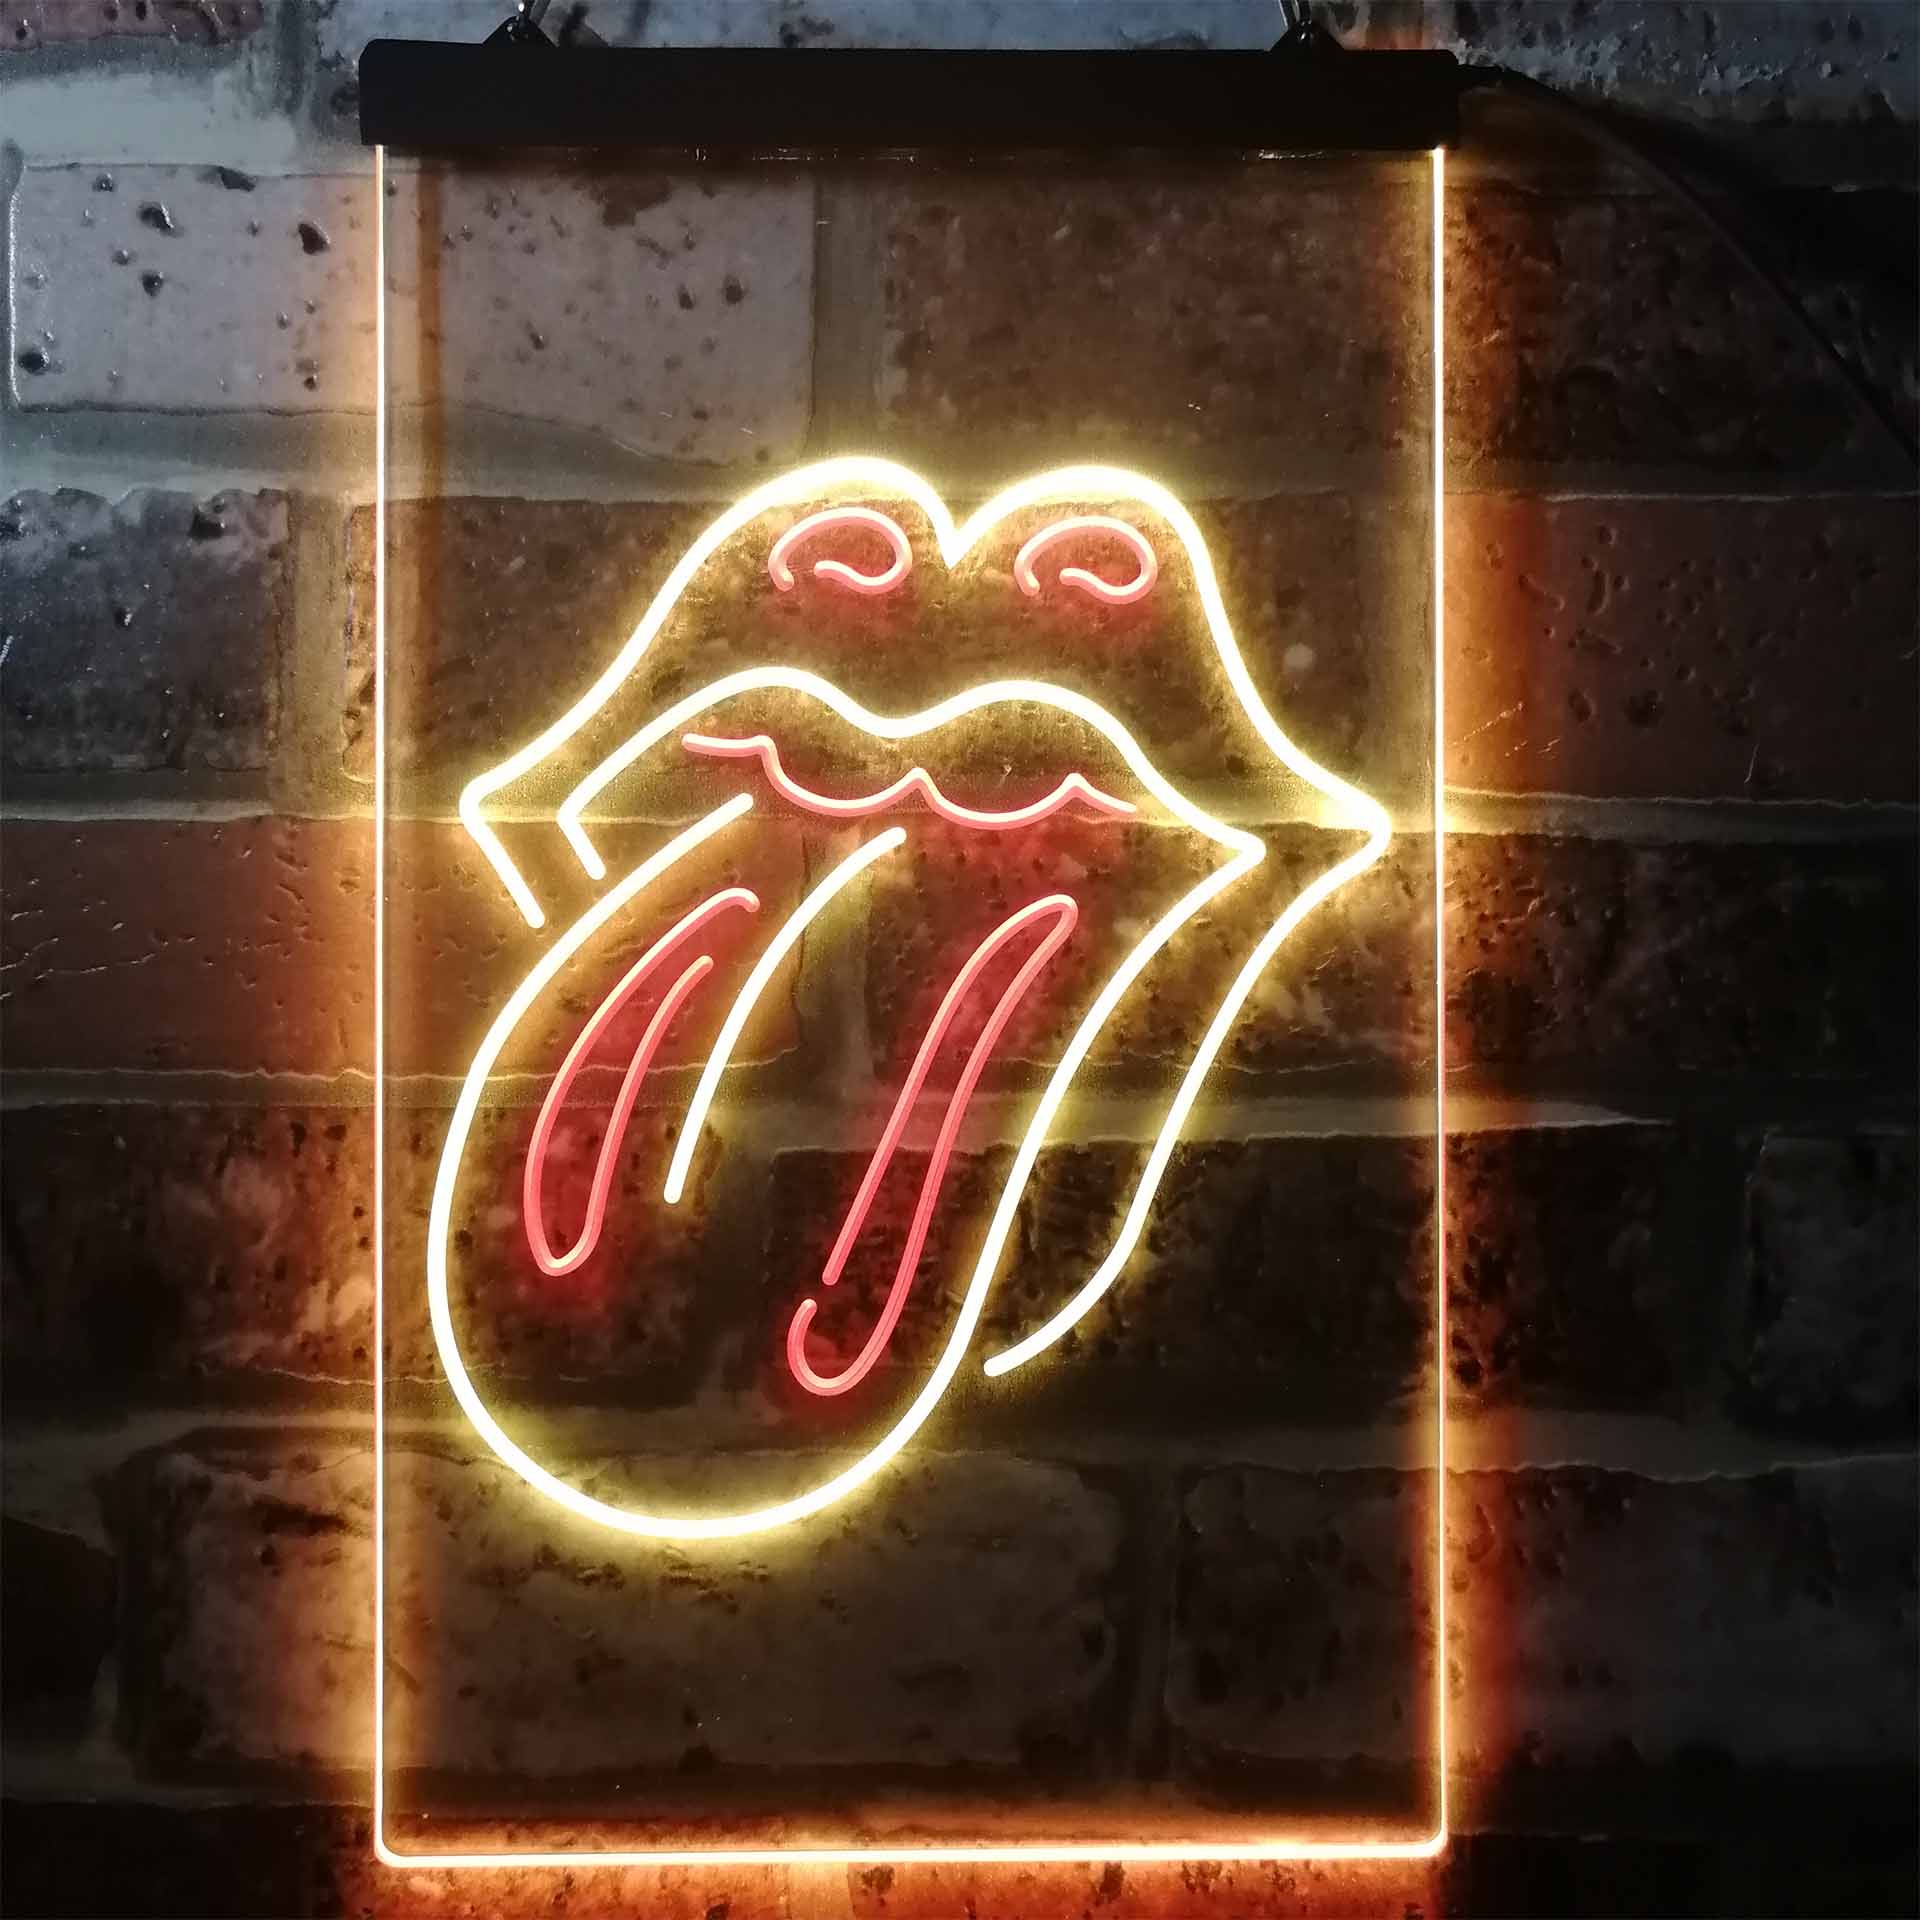 Rolling Stones Logo 2 Neon LED Sign